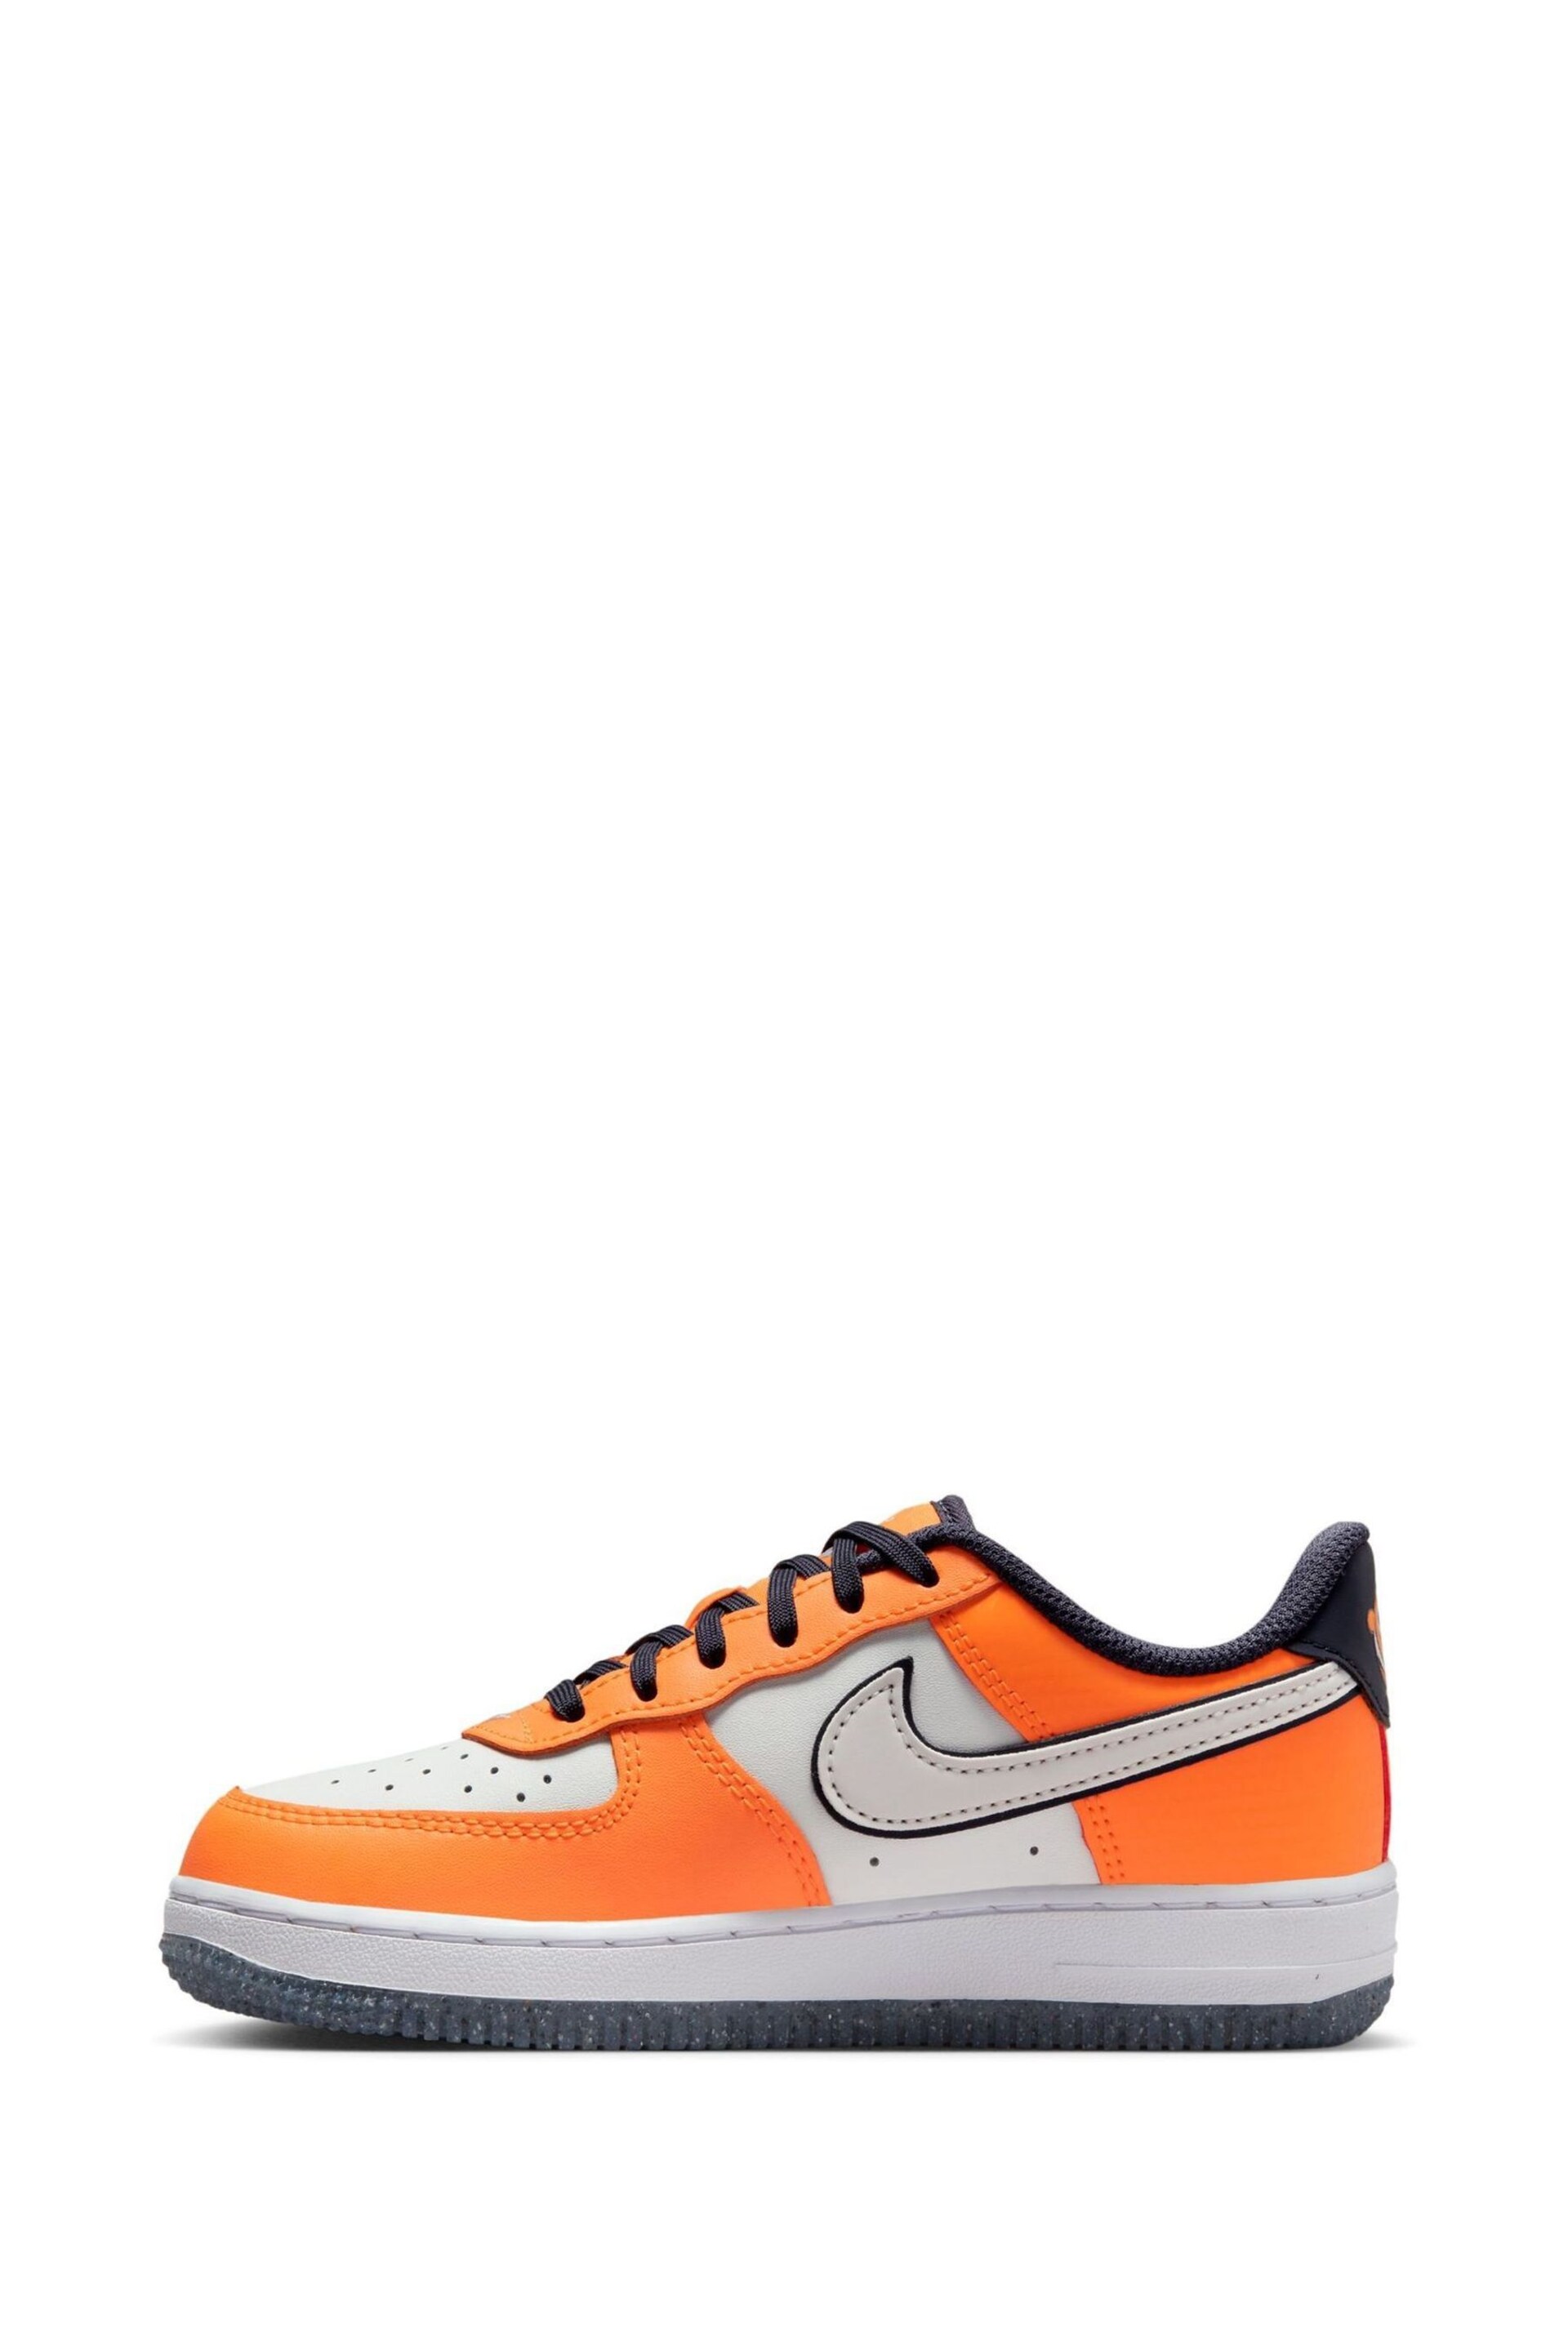 Nike Orange Force 1 Low Junior Trainers - Image 4 of 11